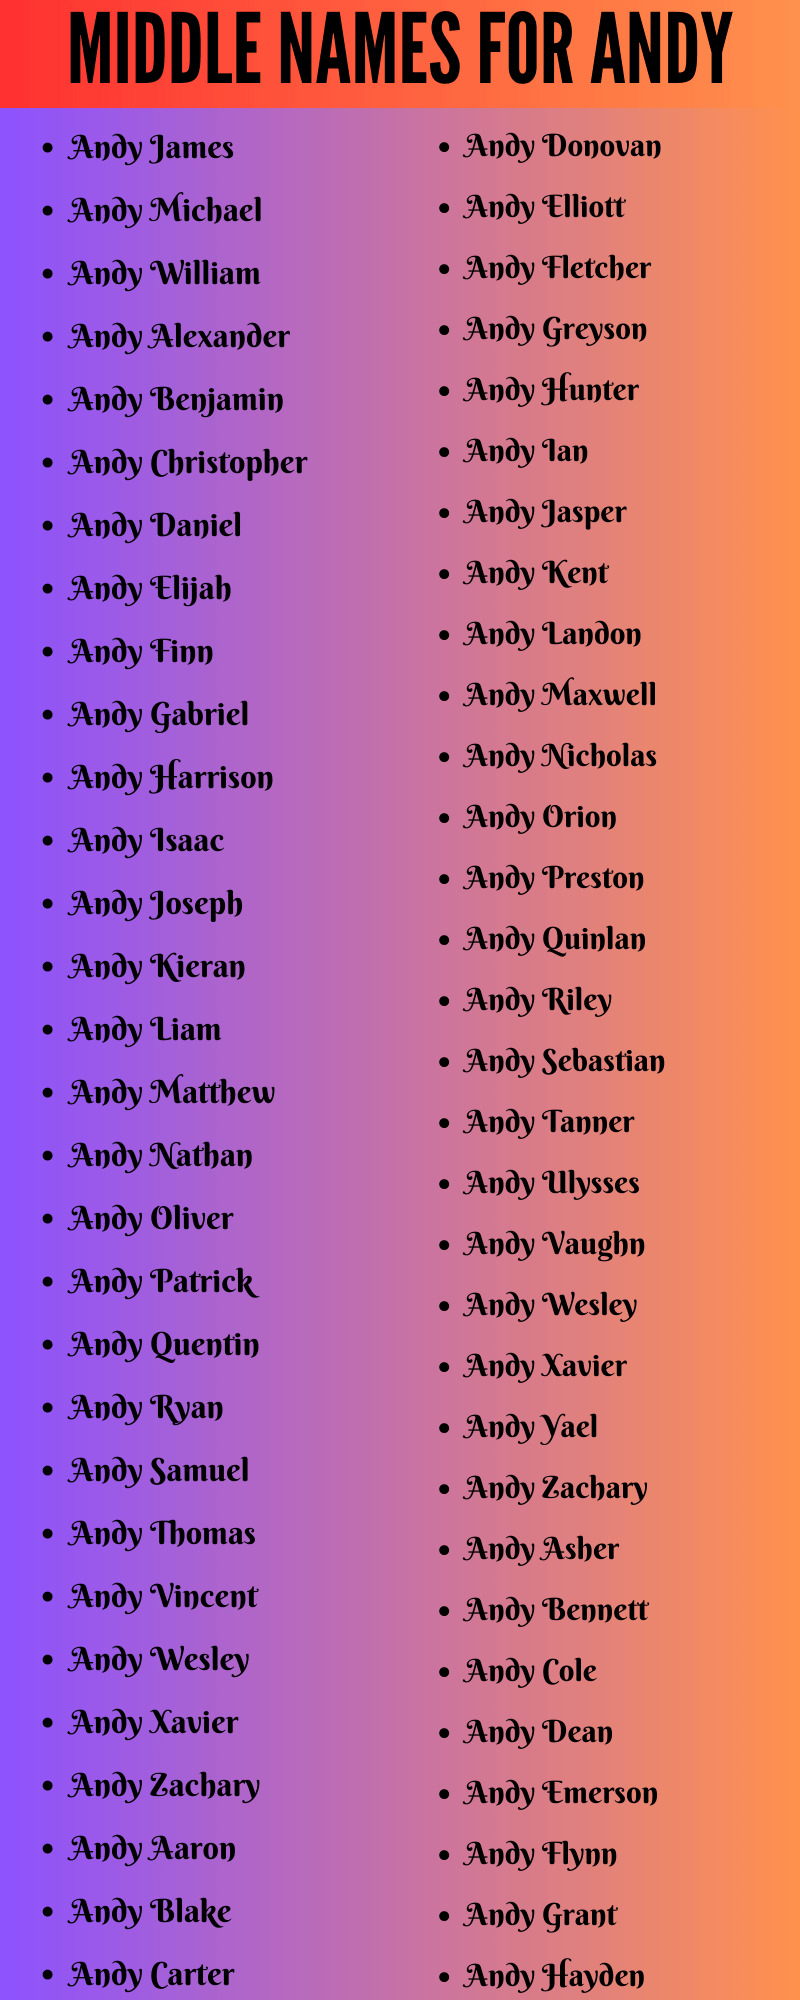 400 Best Middle Names For Andy